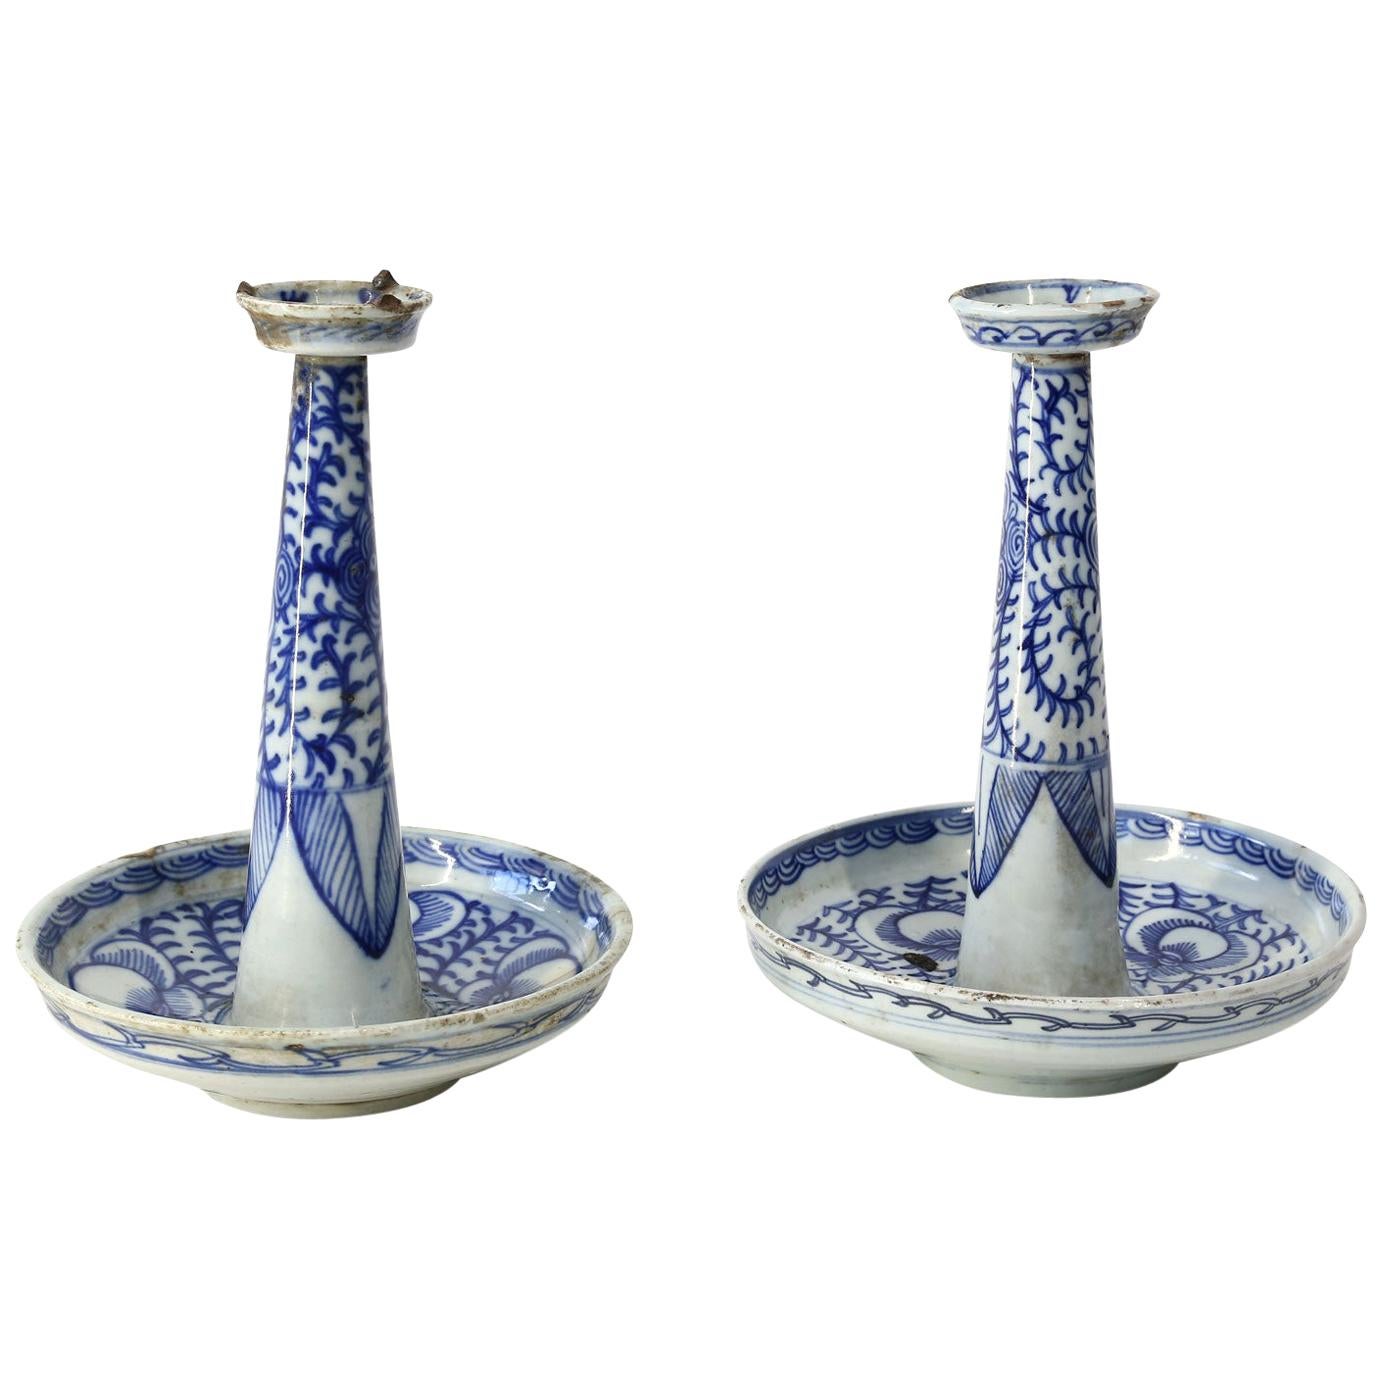 Pair of Chinese Faience Candlesticks